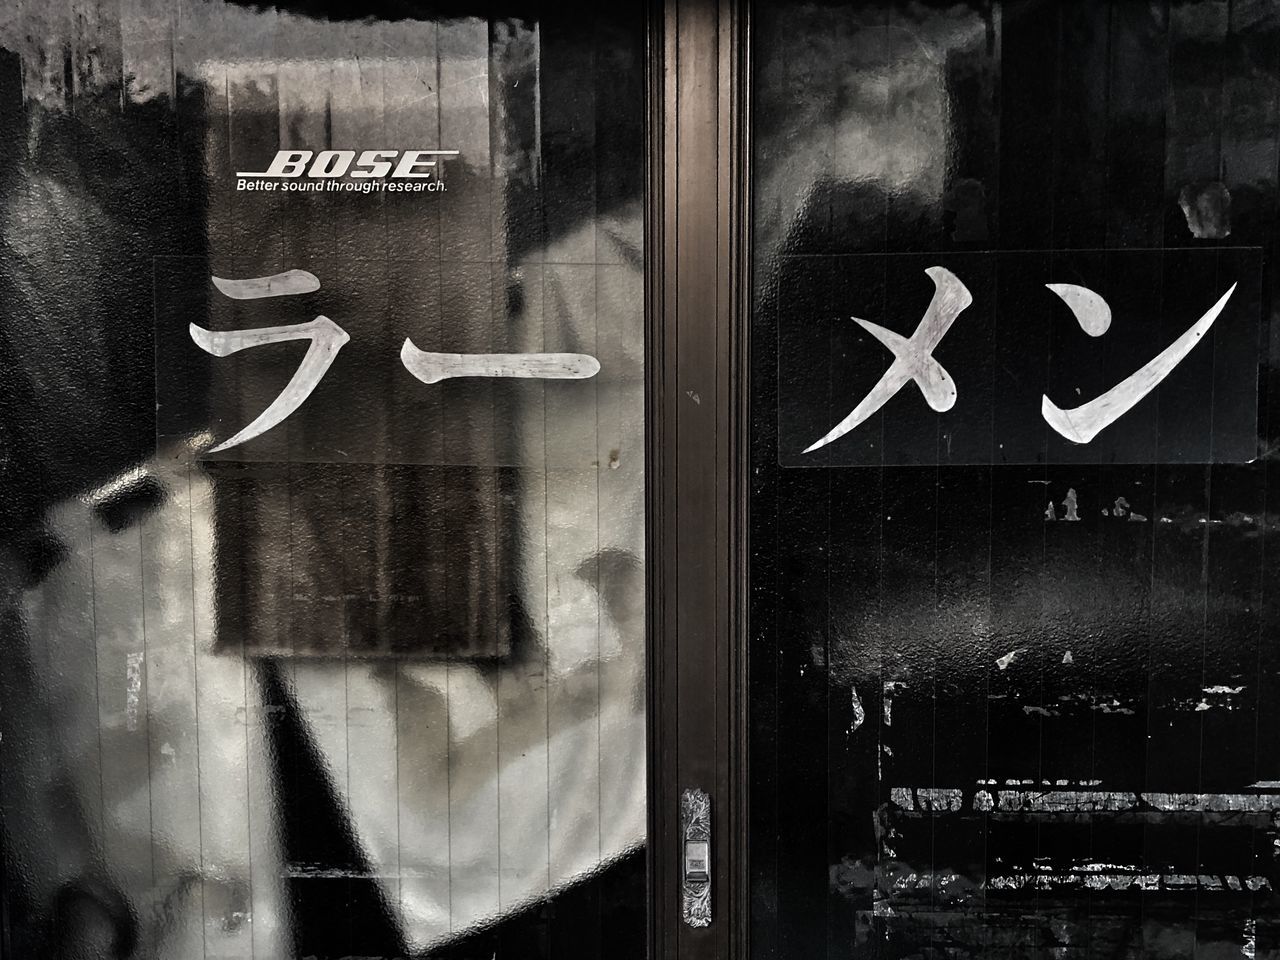 text, communication, glass - material, no people, reflection, sign, western script, graffiti, window, built structure, close-up, architecture, day, art and craft, door, transparent, arrow symbol, indoors, wood - material, entrance